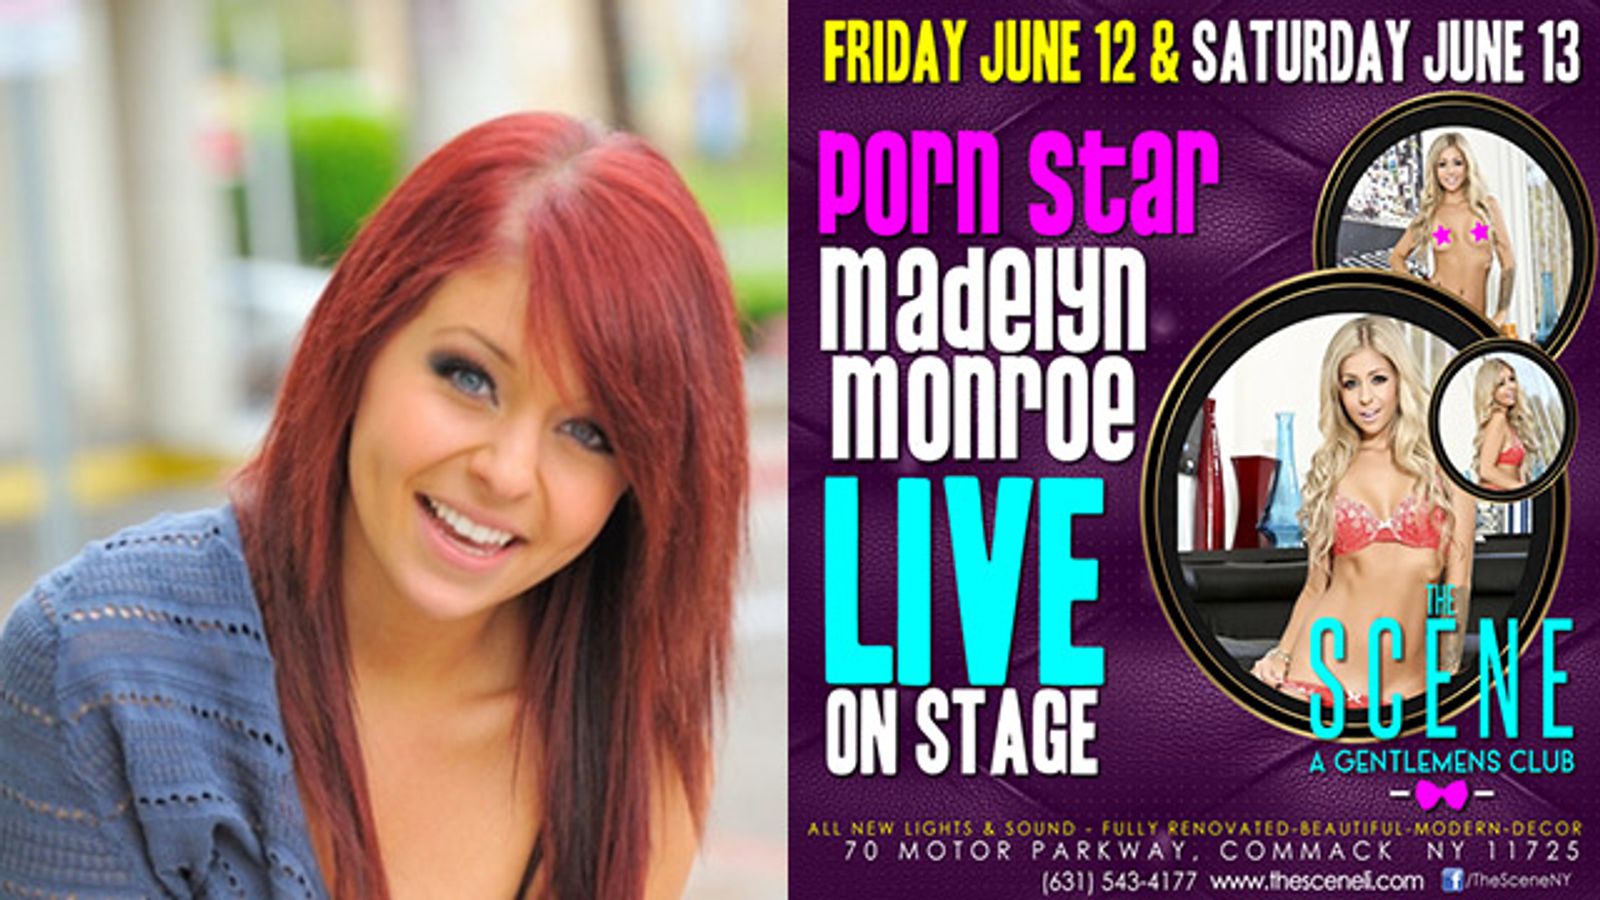 Madelyn Monroe to Perform Live at The Scene Gentlemen’s Club